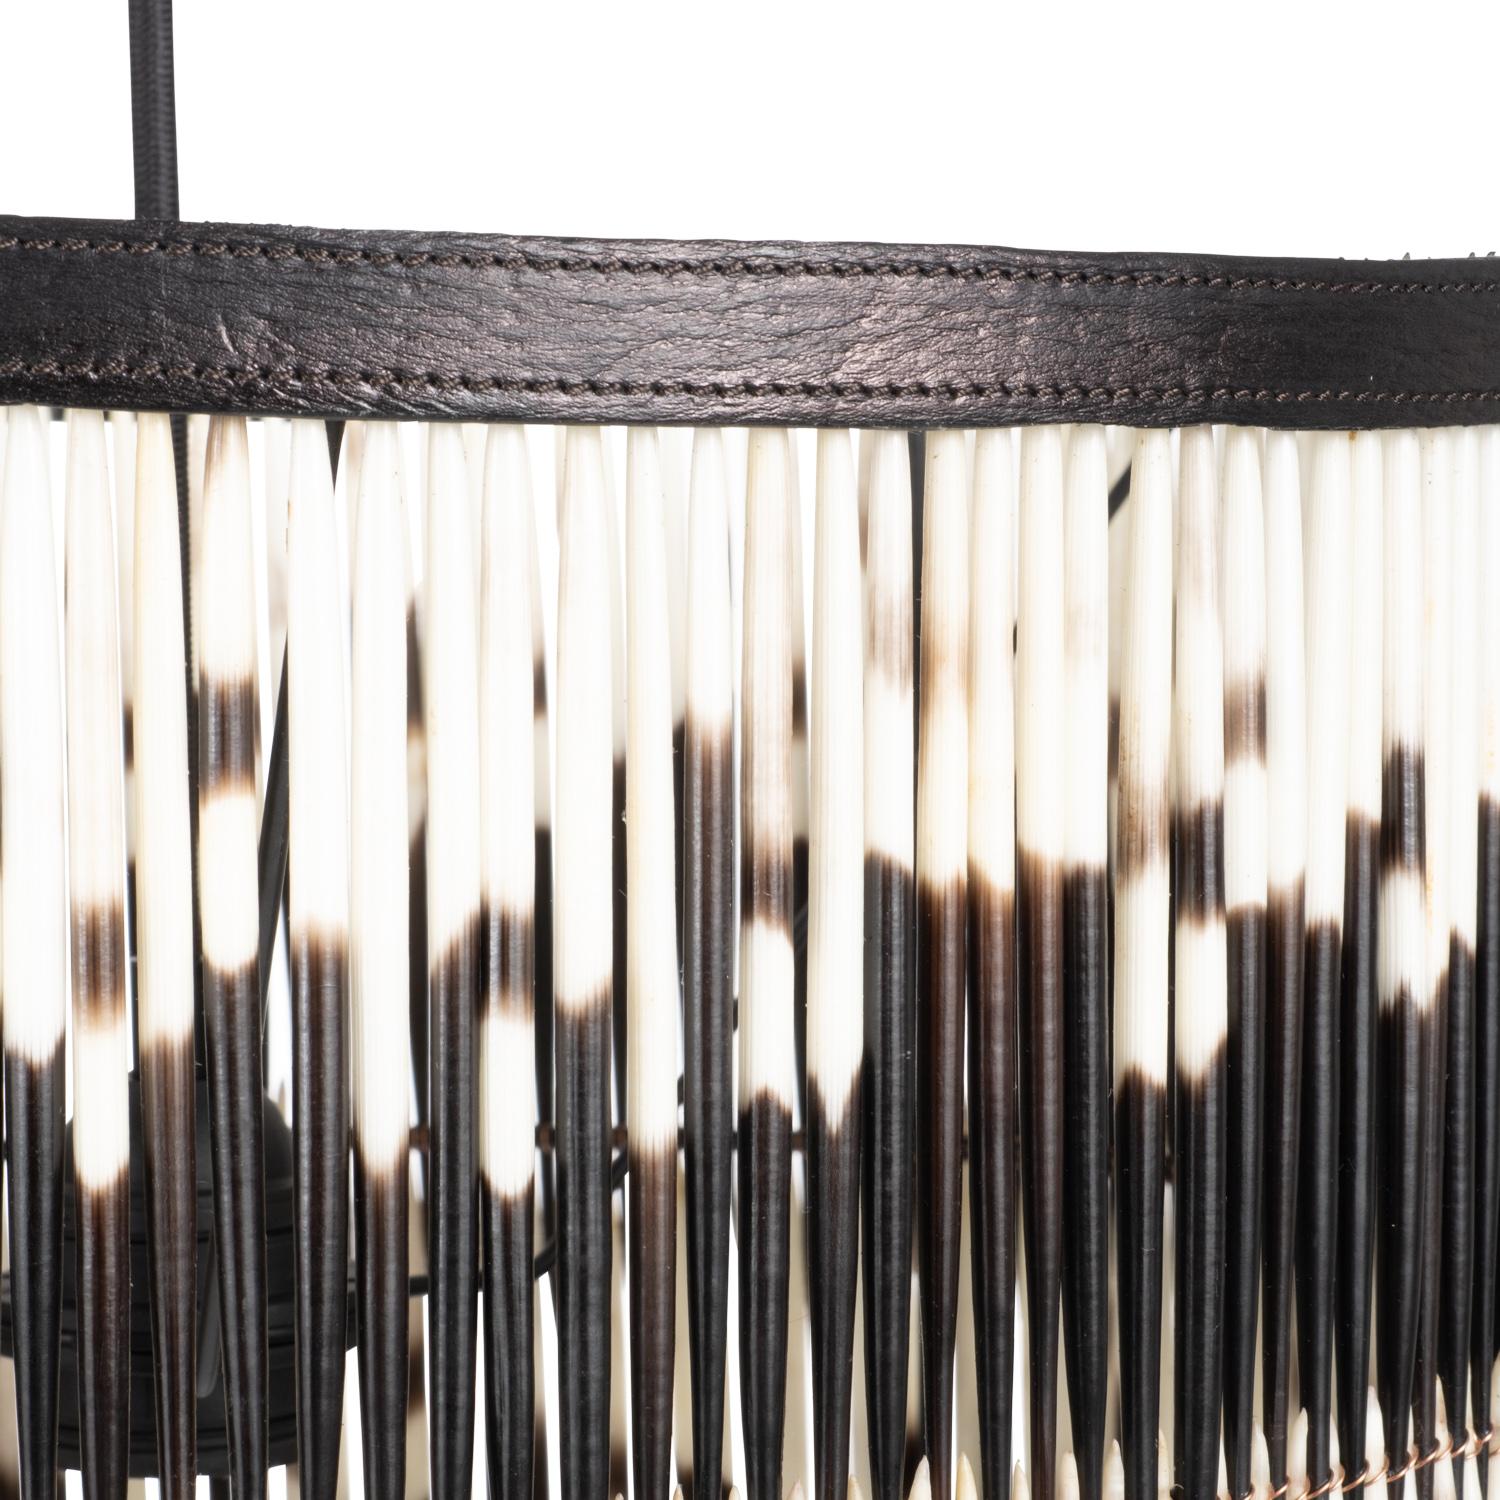 Porcupine Quill Pendants are made by hand in Cape Town, South Africa. All three style options are crafted from genuine porcupine quill, resulting in a unique and eye-catching style. Due to the use of natural materials, each piece is unique and may